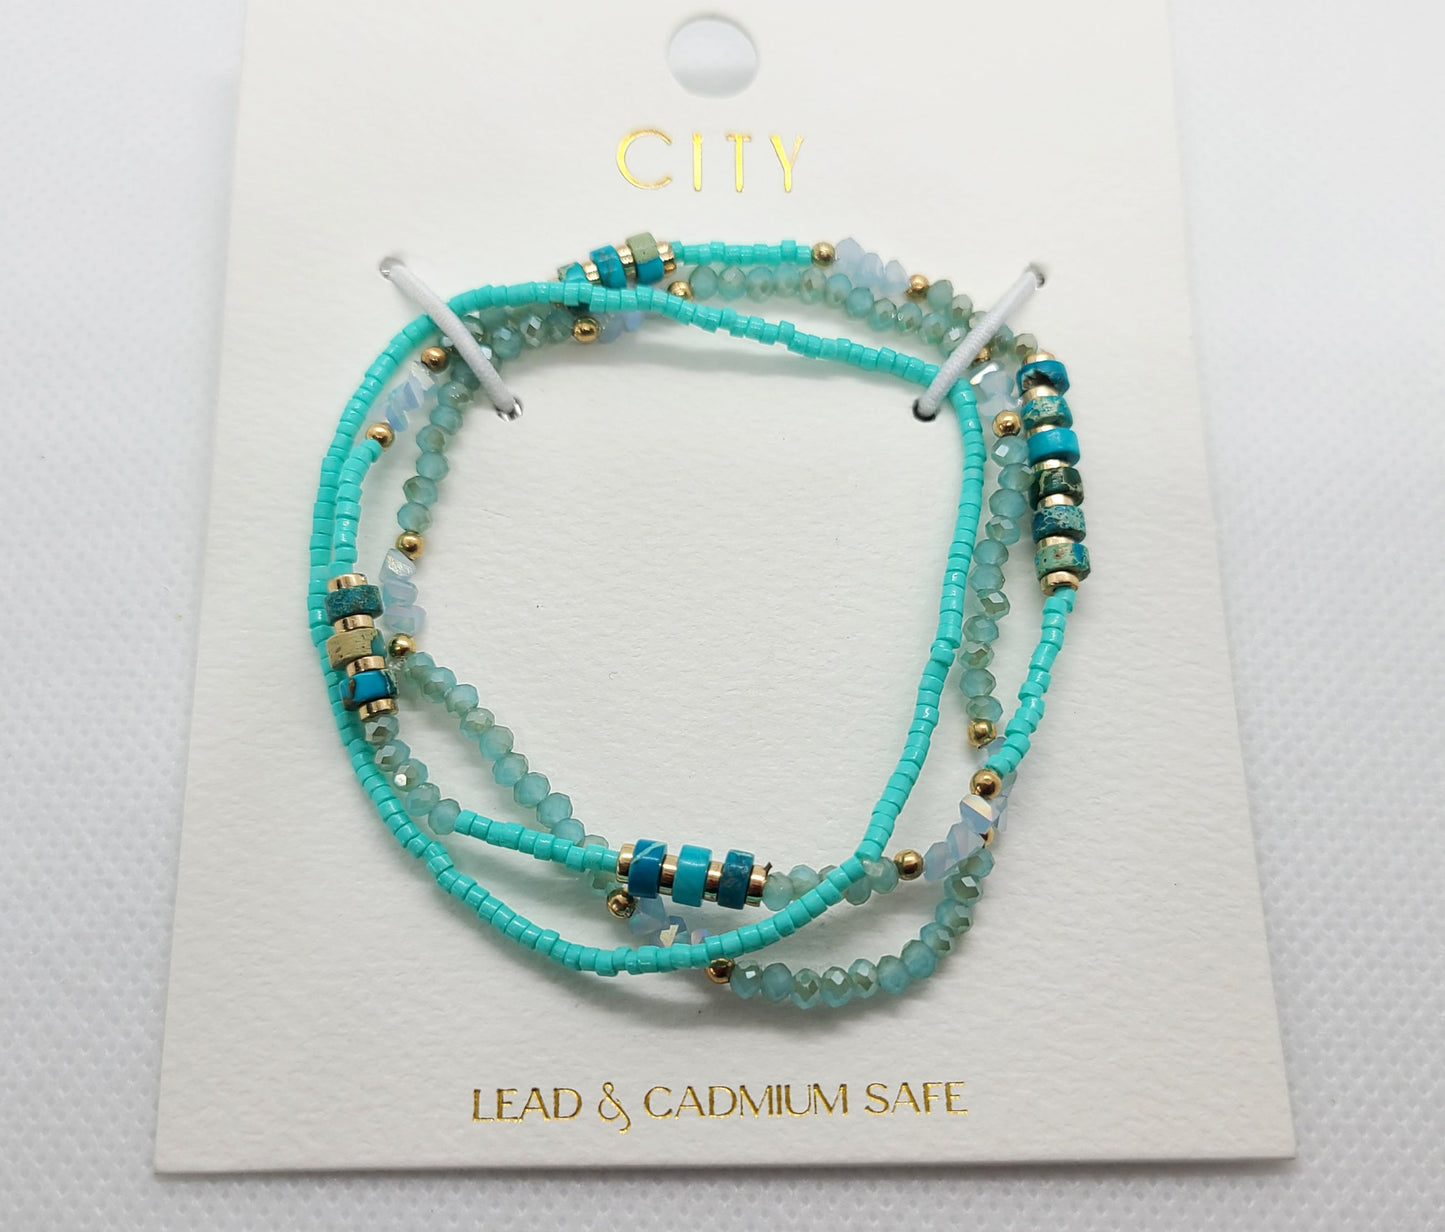 set of 3 fashion bracelets. one is all small turquoise beads, one is a mix of turquoise heishi, gold tone beads and crystals.  The other is faceted crystal beads and gold tone beads.